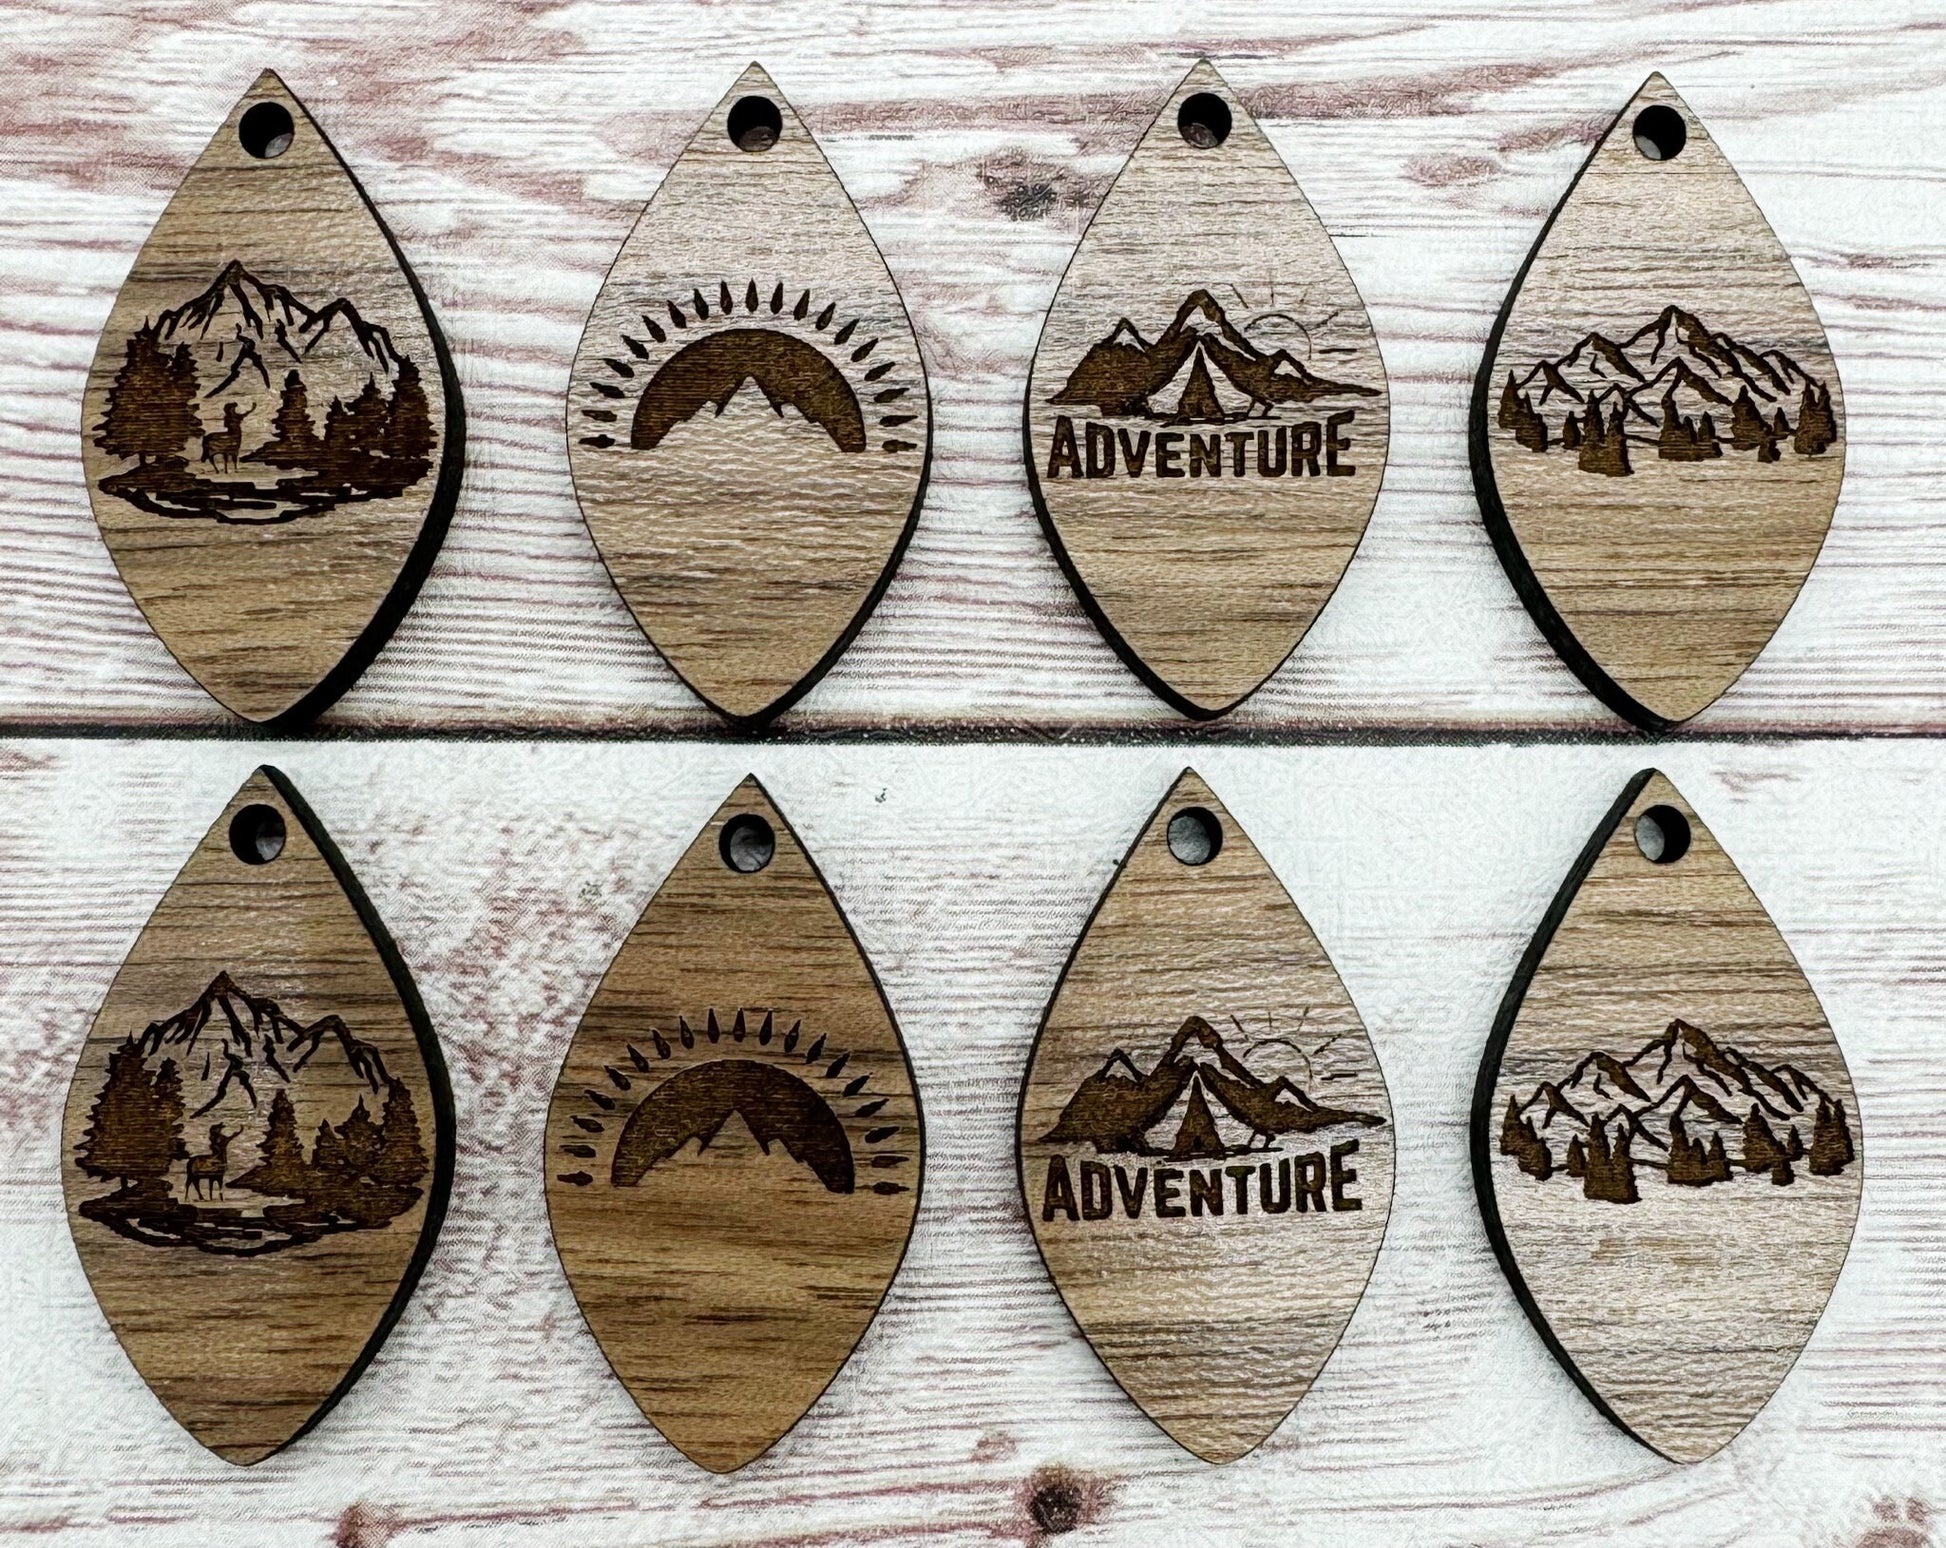 Set of 4 Mountain Adventure Outdoors Engraved Finished Walnut Micro Teardrop Blanks, DIY Jewelry Making